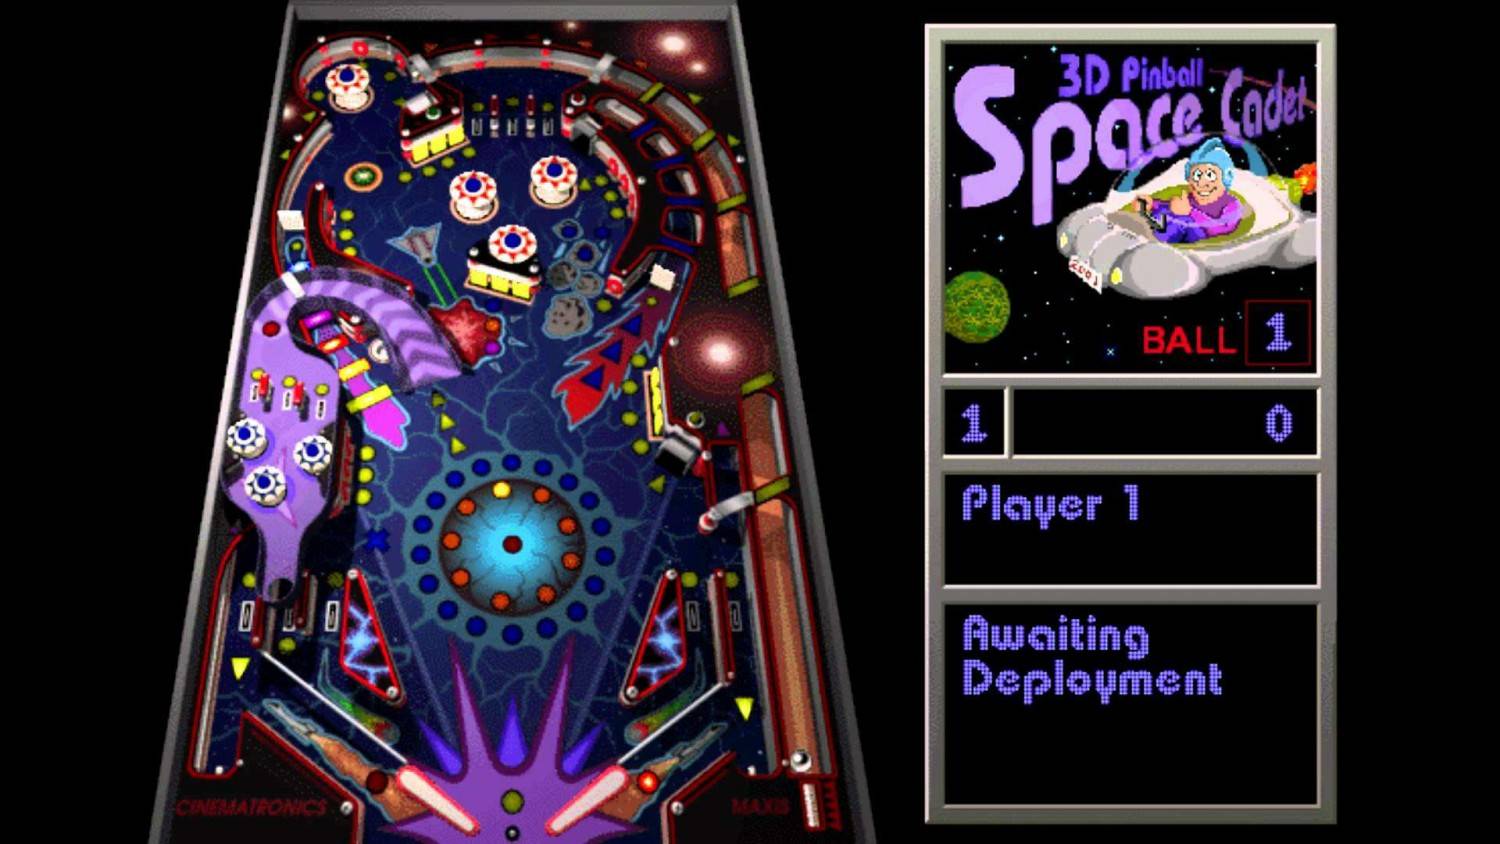 3d pinball space cadet download for mac